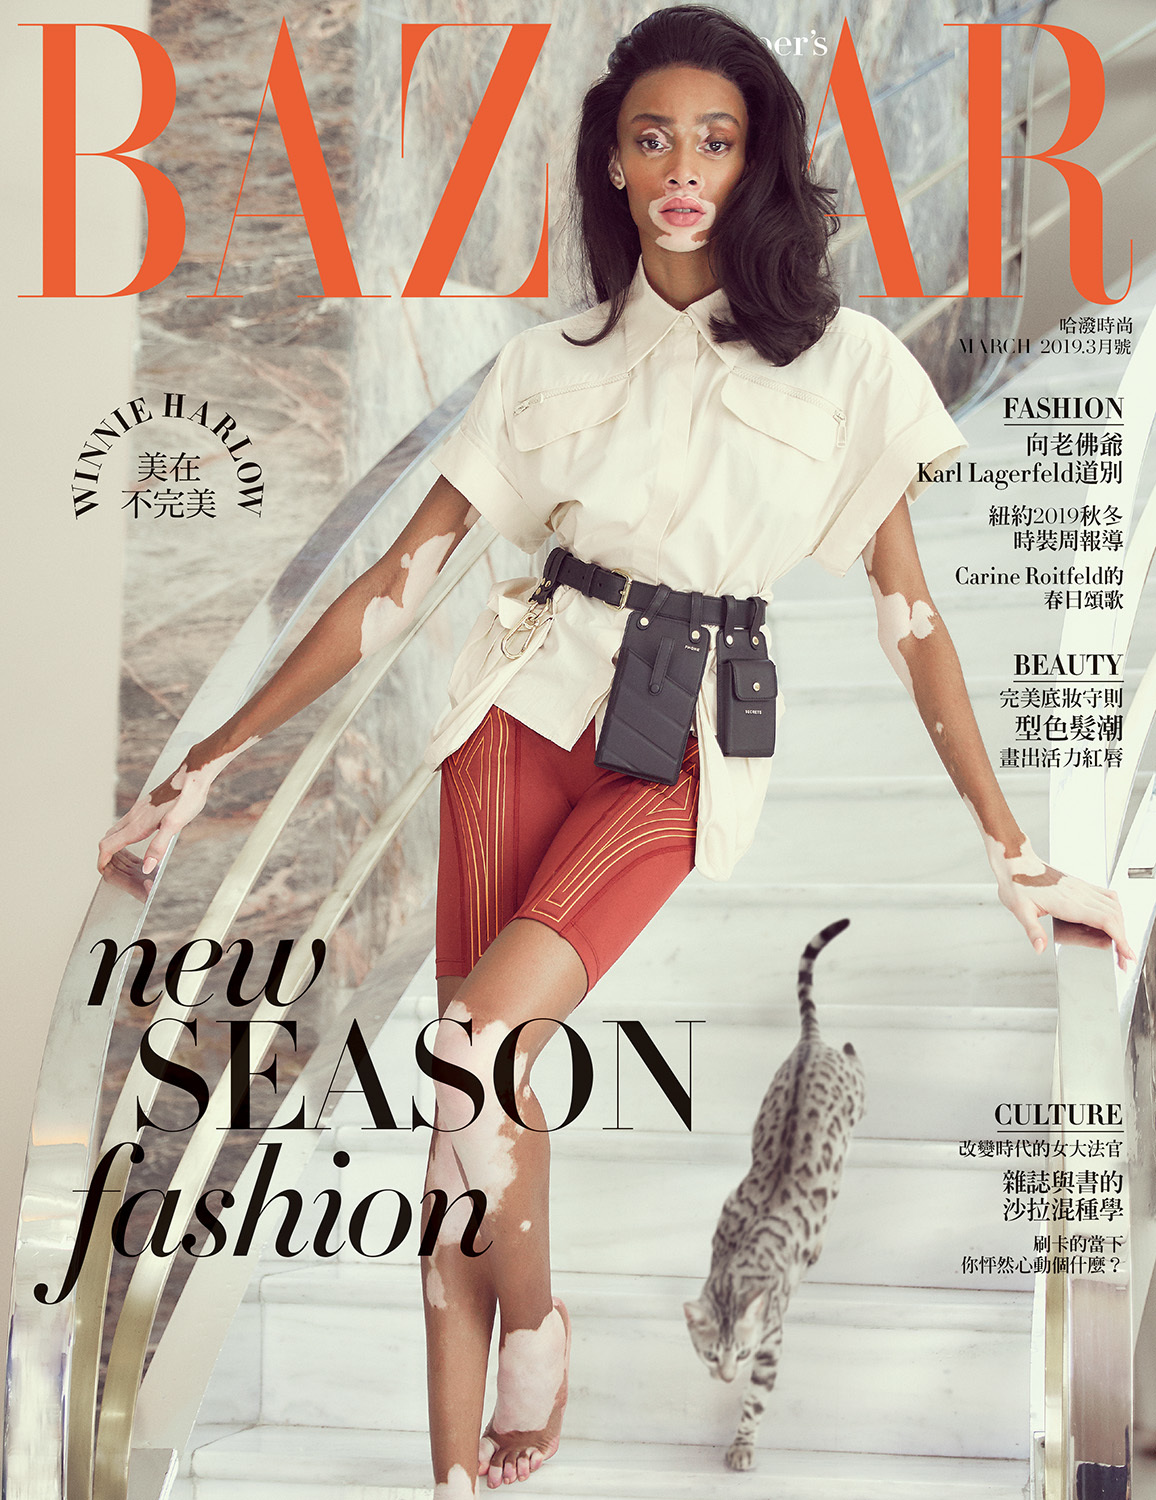 Harper's Bazaar Taiwan March 2019 Cover Story Editorial